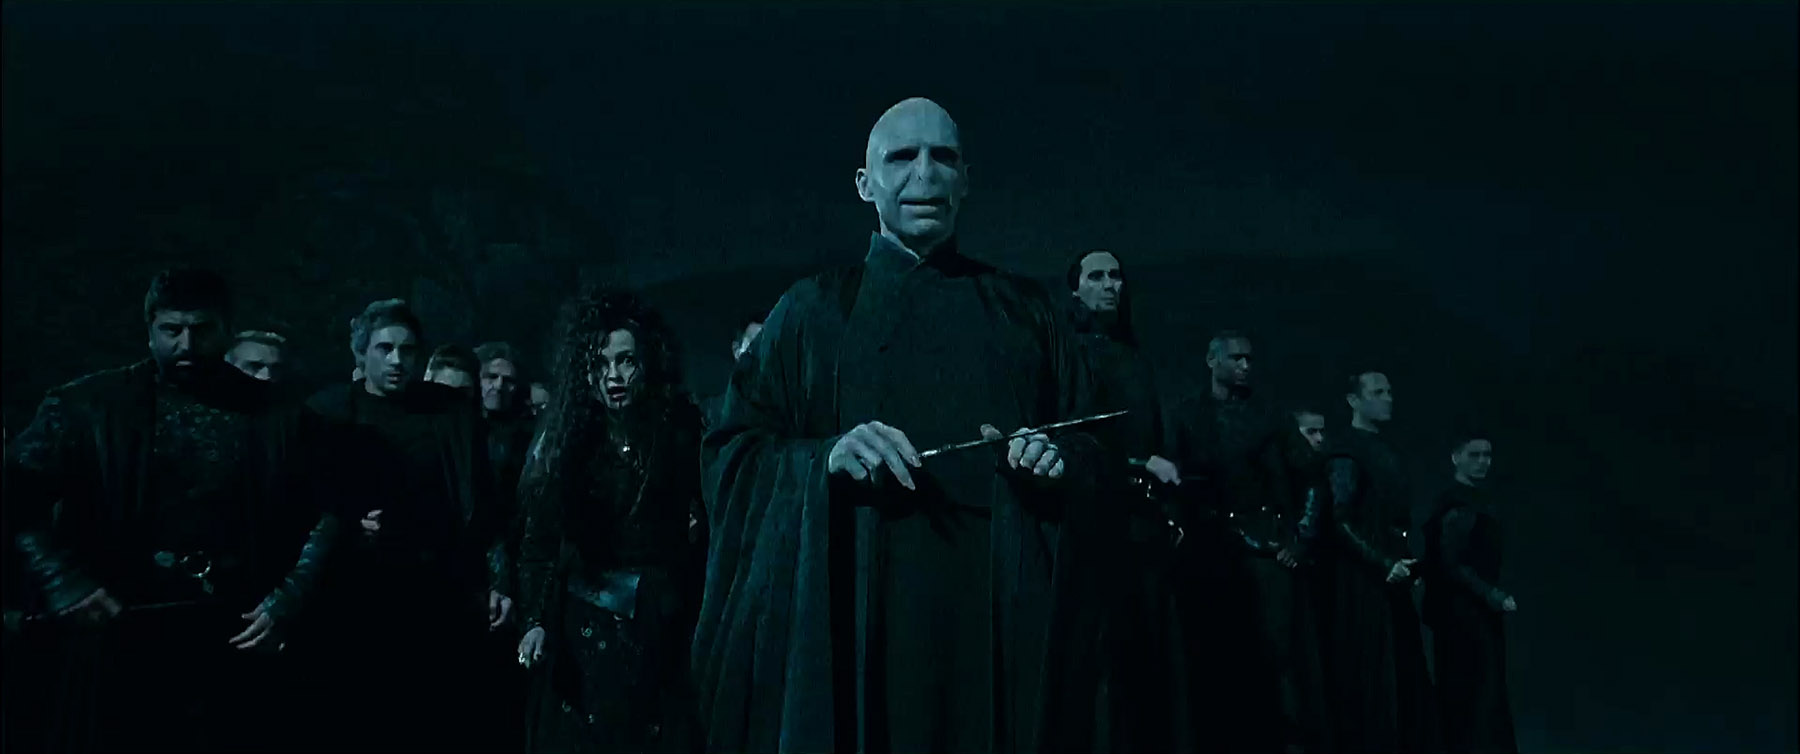  Ralph Fiennes as Lord Voldemort in Warner Bros. Pictures' fantasy adventure "Harry Potter and the Deathly Hallows: Part I".